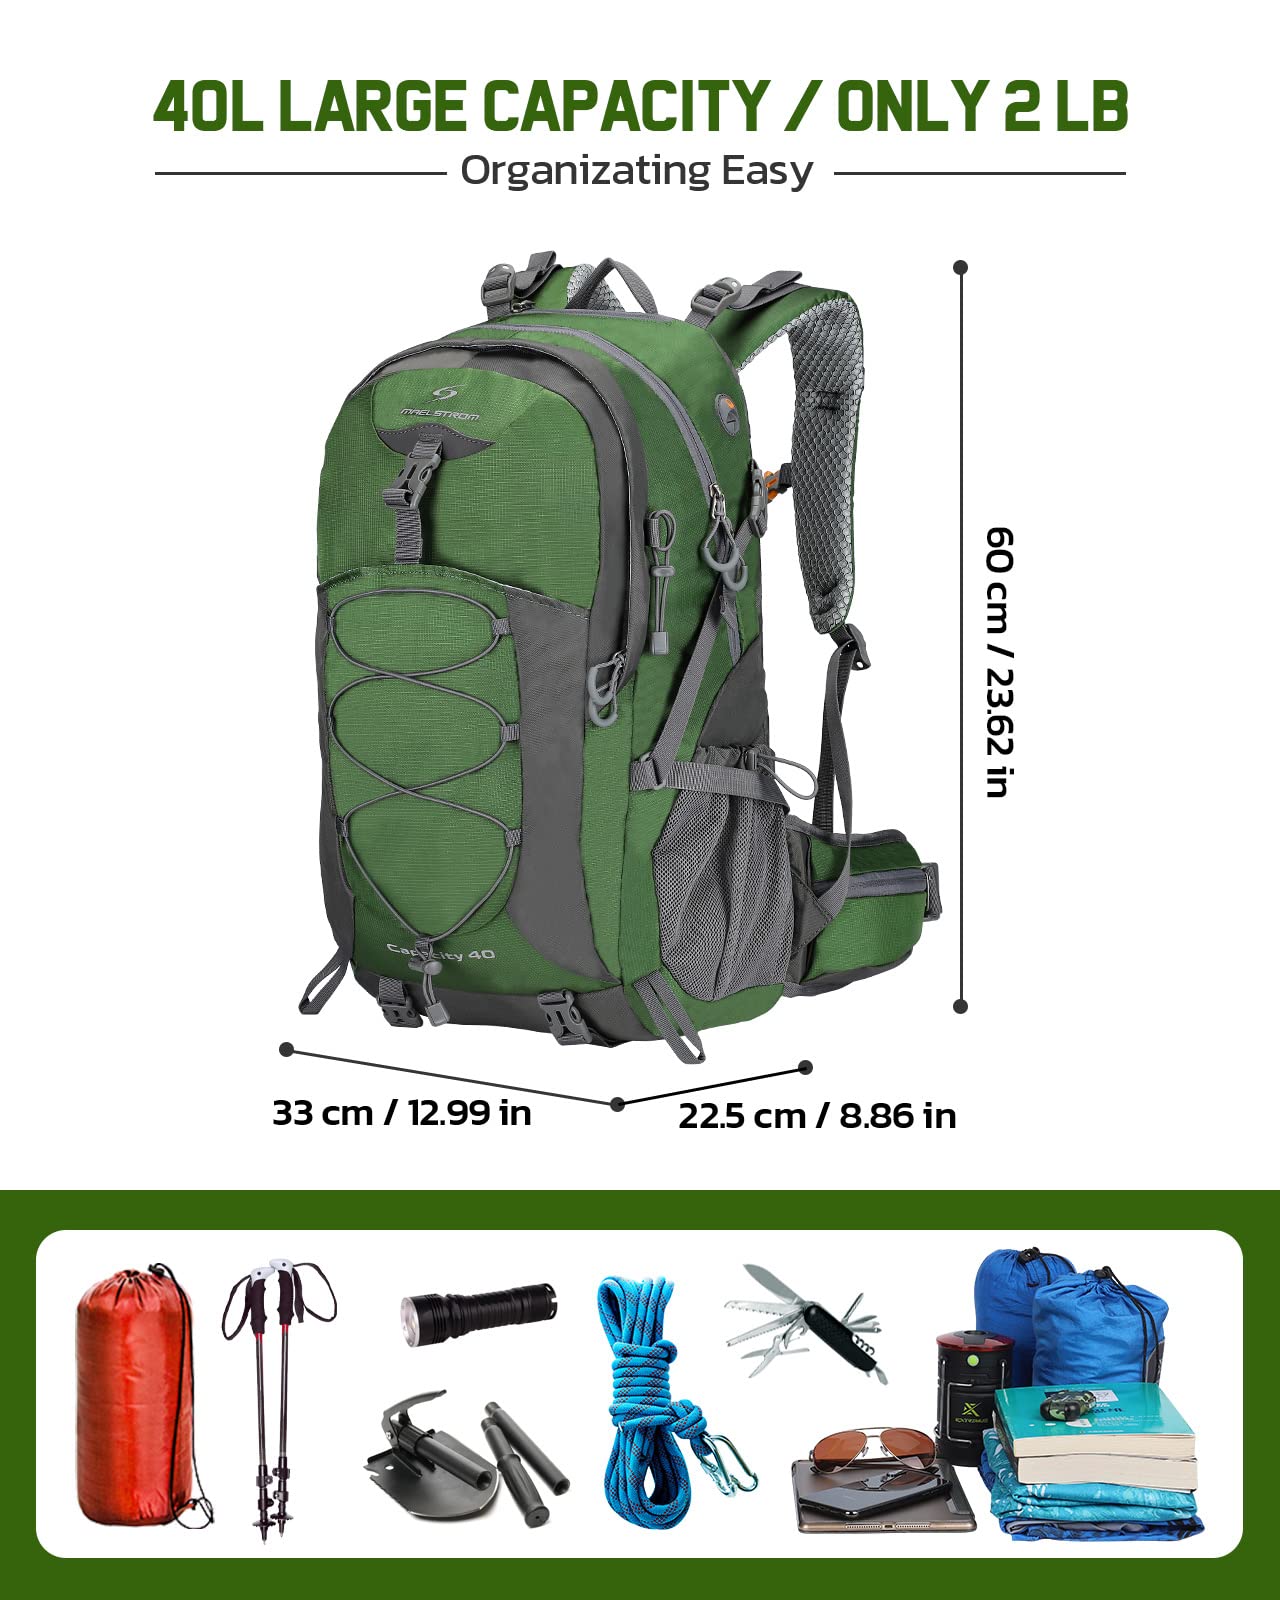 Maelstrom Hiking Backpack, Camping Backpack, 40L/50L Waterproof Hiking Daypack with Rain Cover, Lightweight Travel Backpack